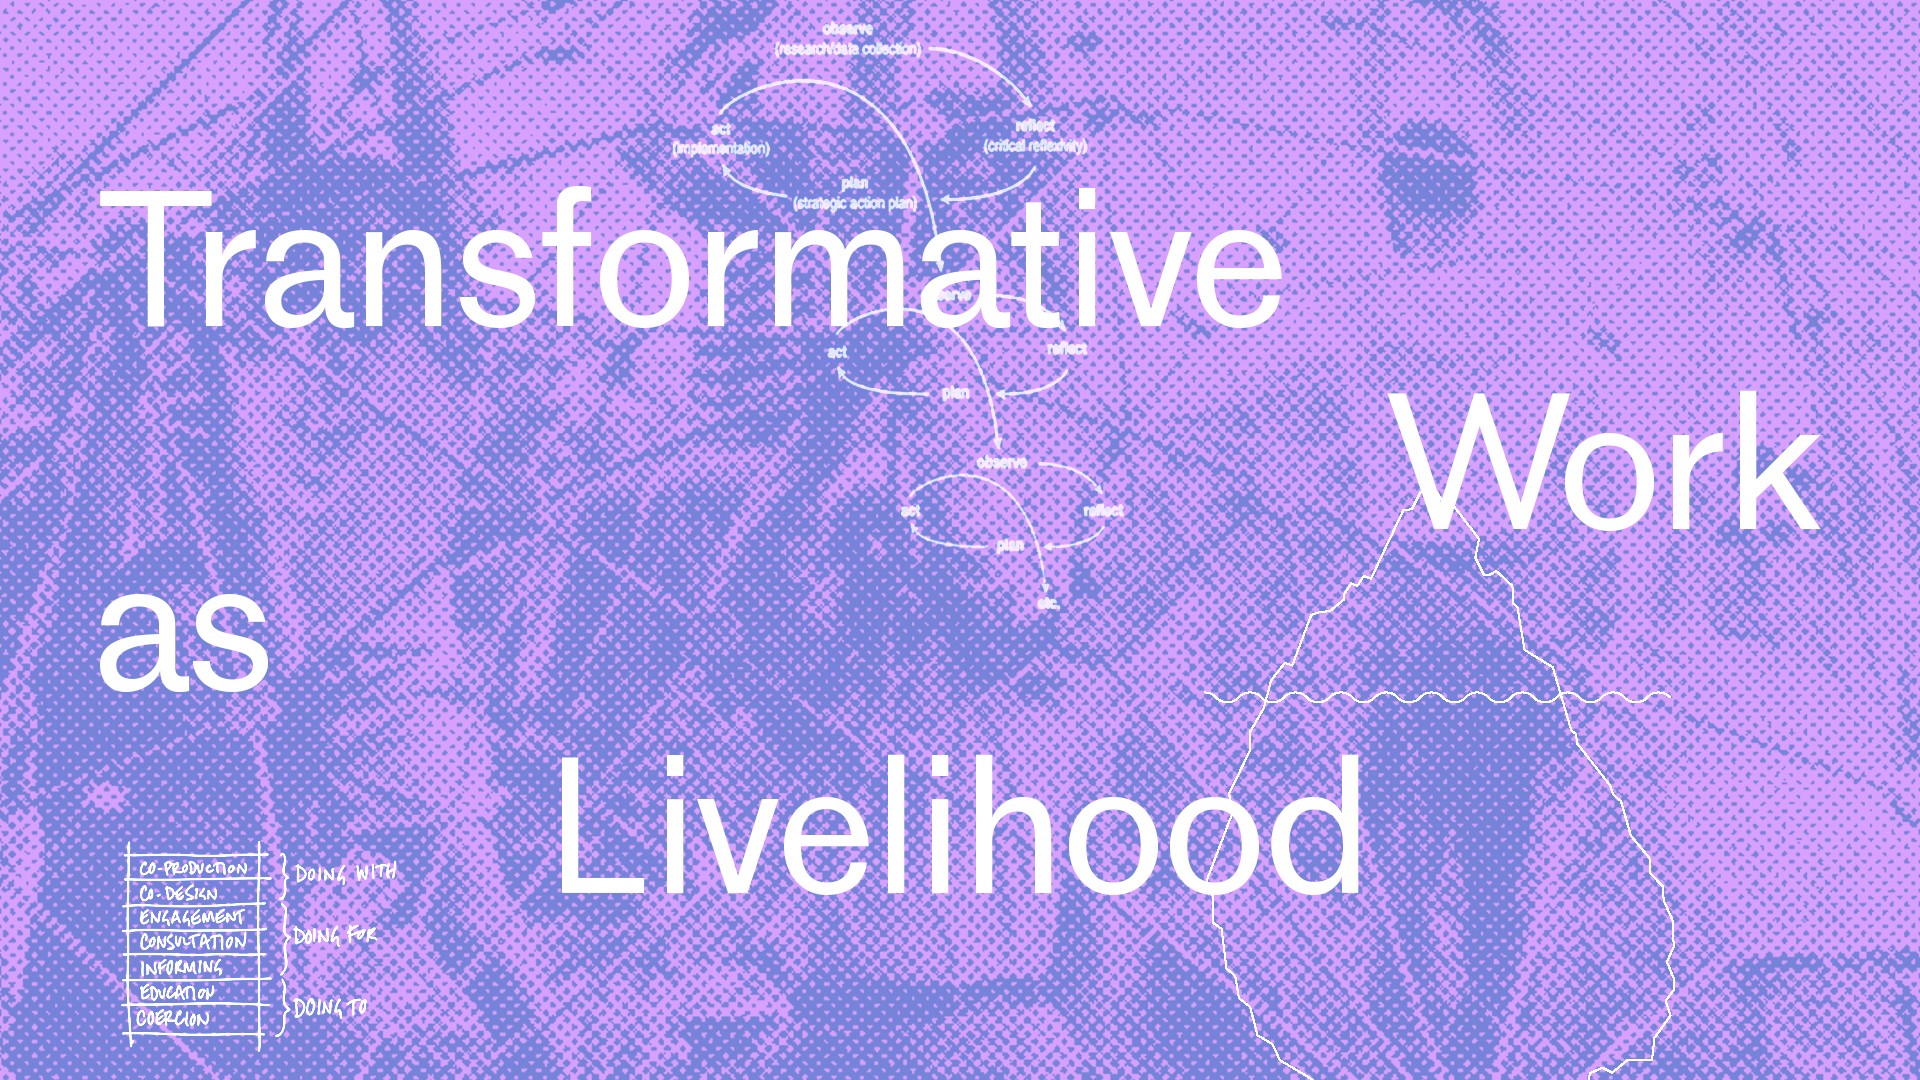 Cover slide from my presentation which reads "Transformative Work as Livelihood".